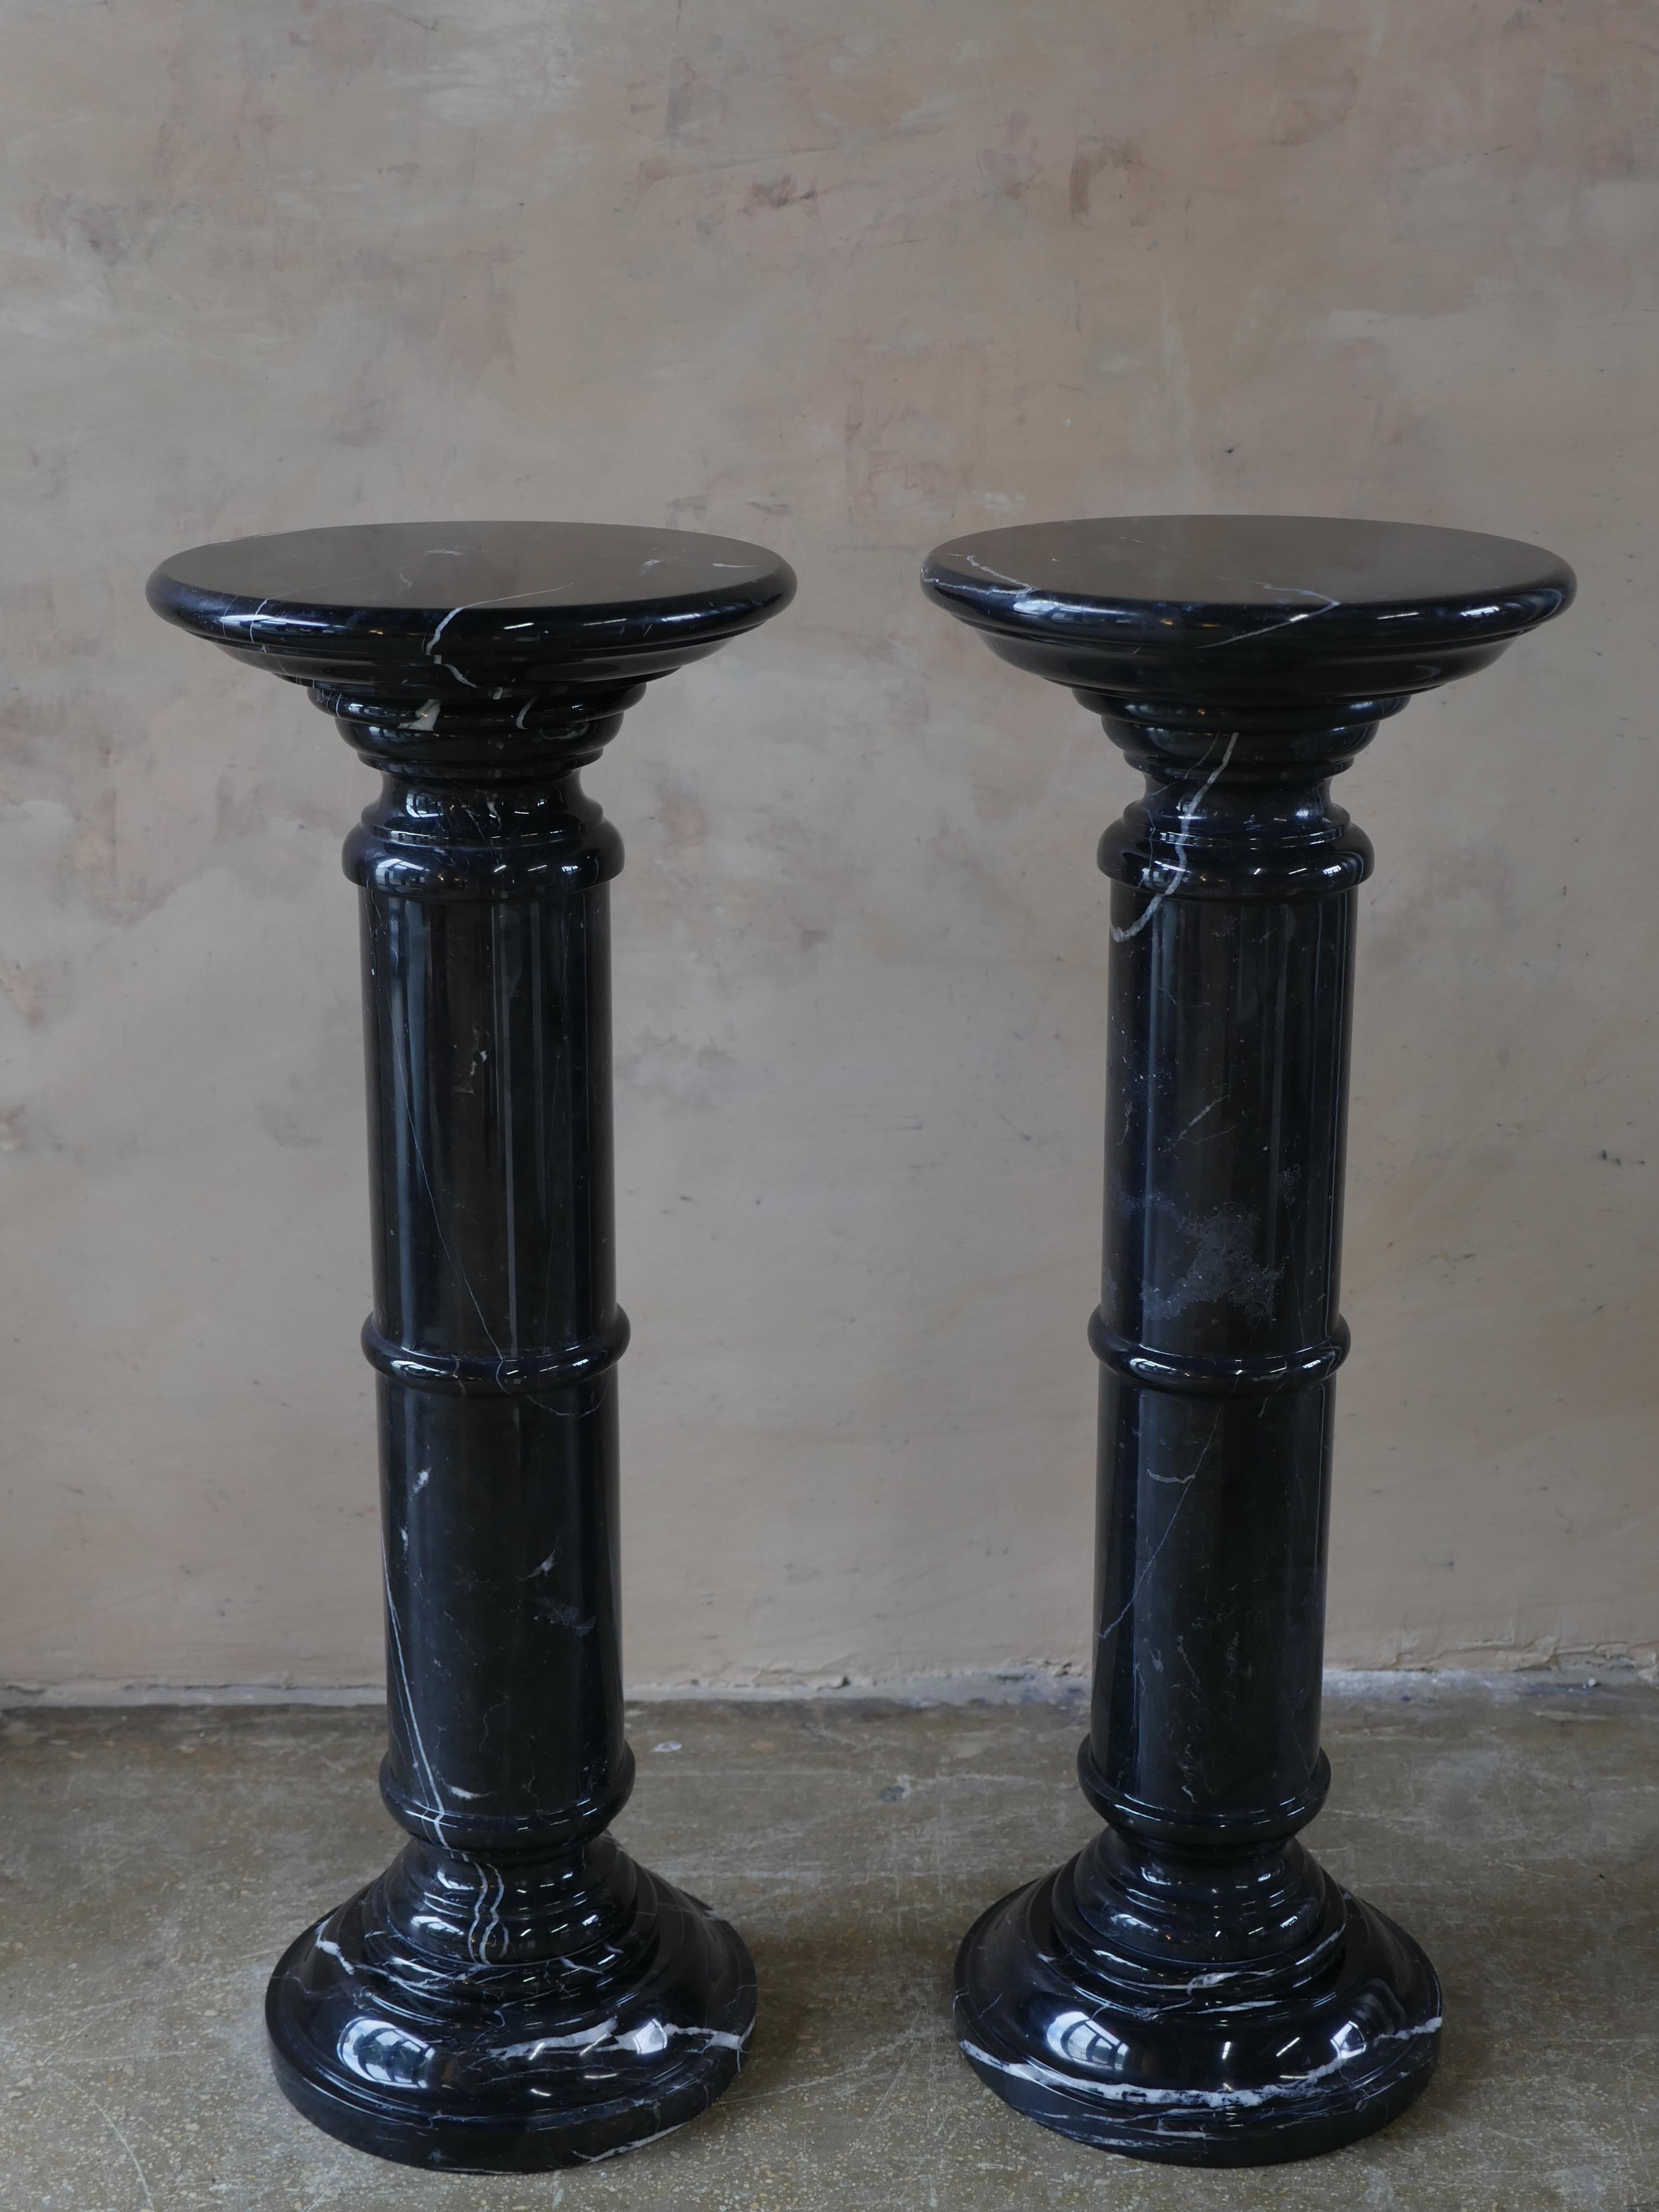 1970s Polished Nero Marquina Solid Marble Pedestals - Set of 2 For Sale 4